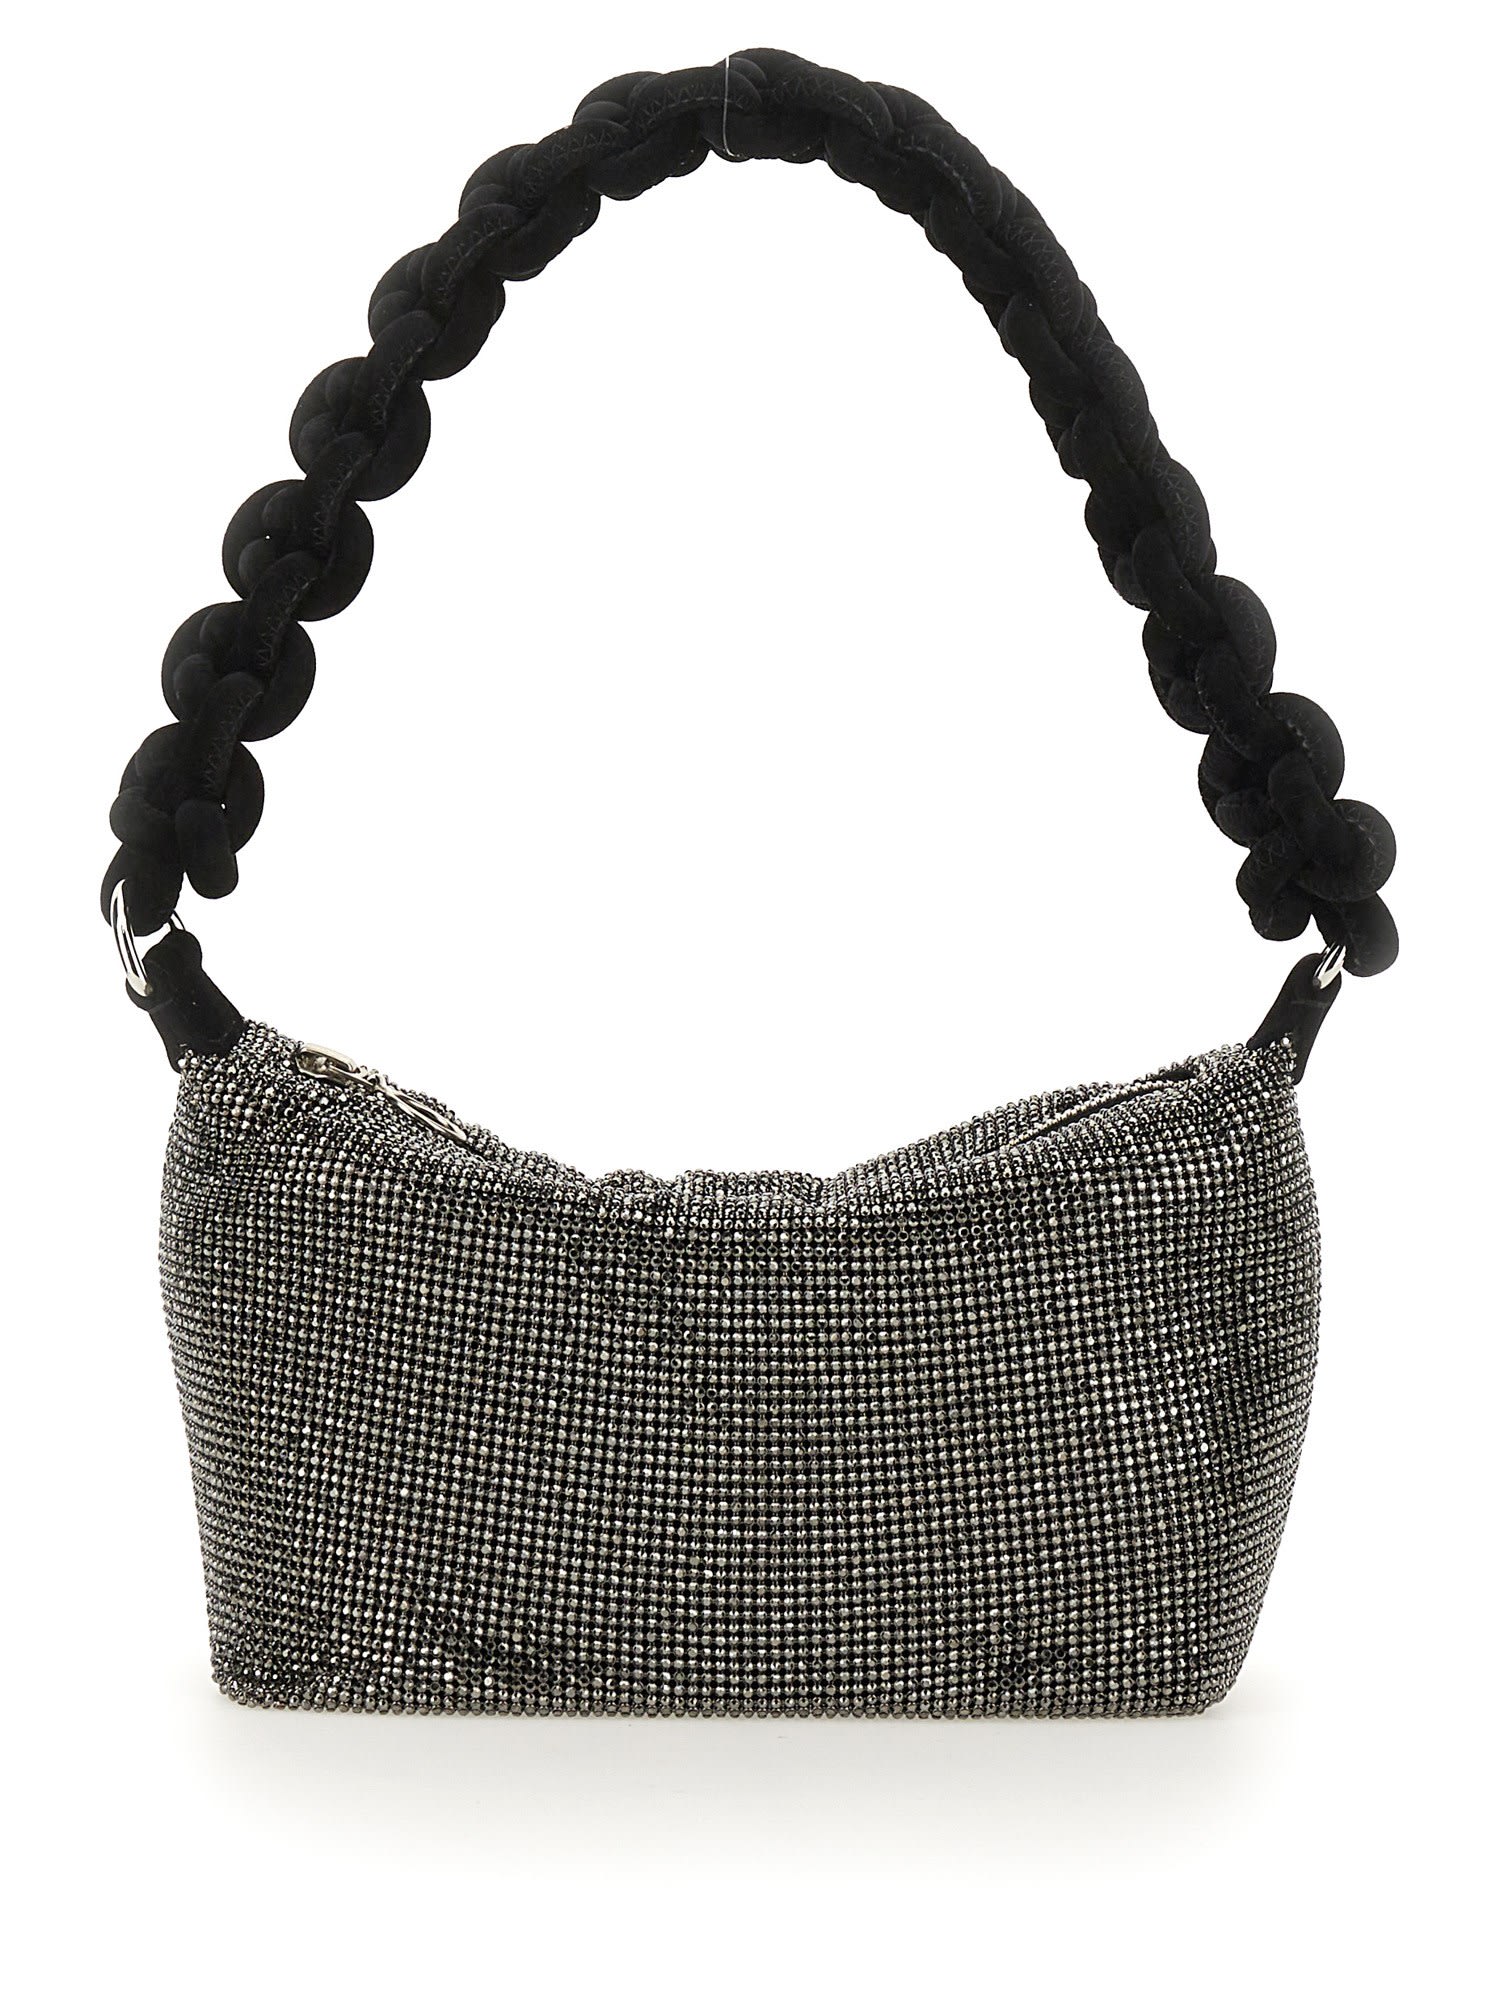 KARA BAG WITH KNOTTED HANDLE